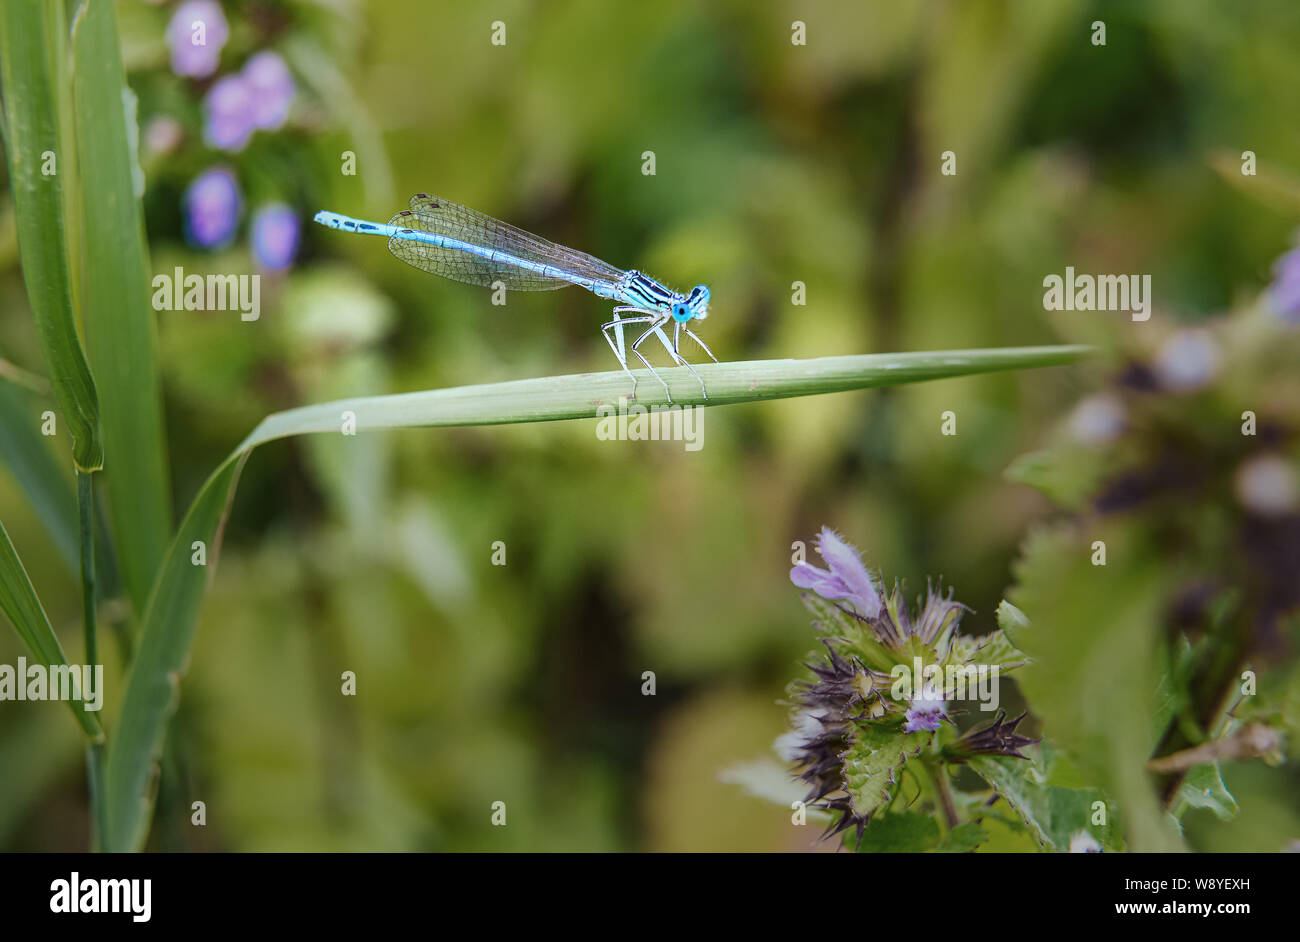 Close-up of beautiful small turquoise colored dragonfly sitting on green grass leaf. Male of Common blue damselfly in natural habitat. Selective focus Stock Photo